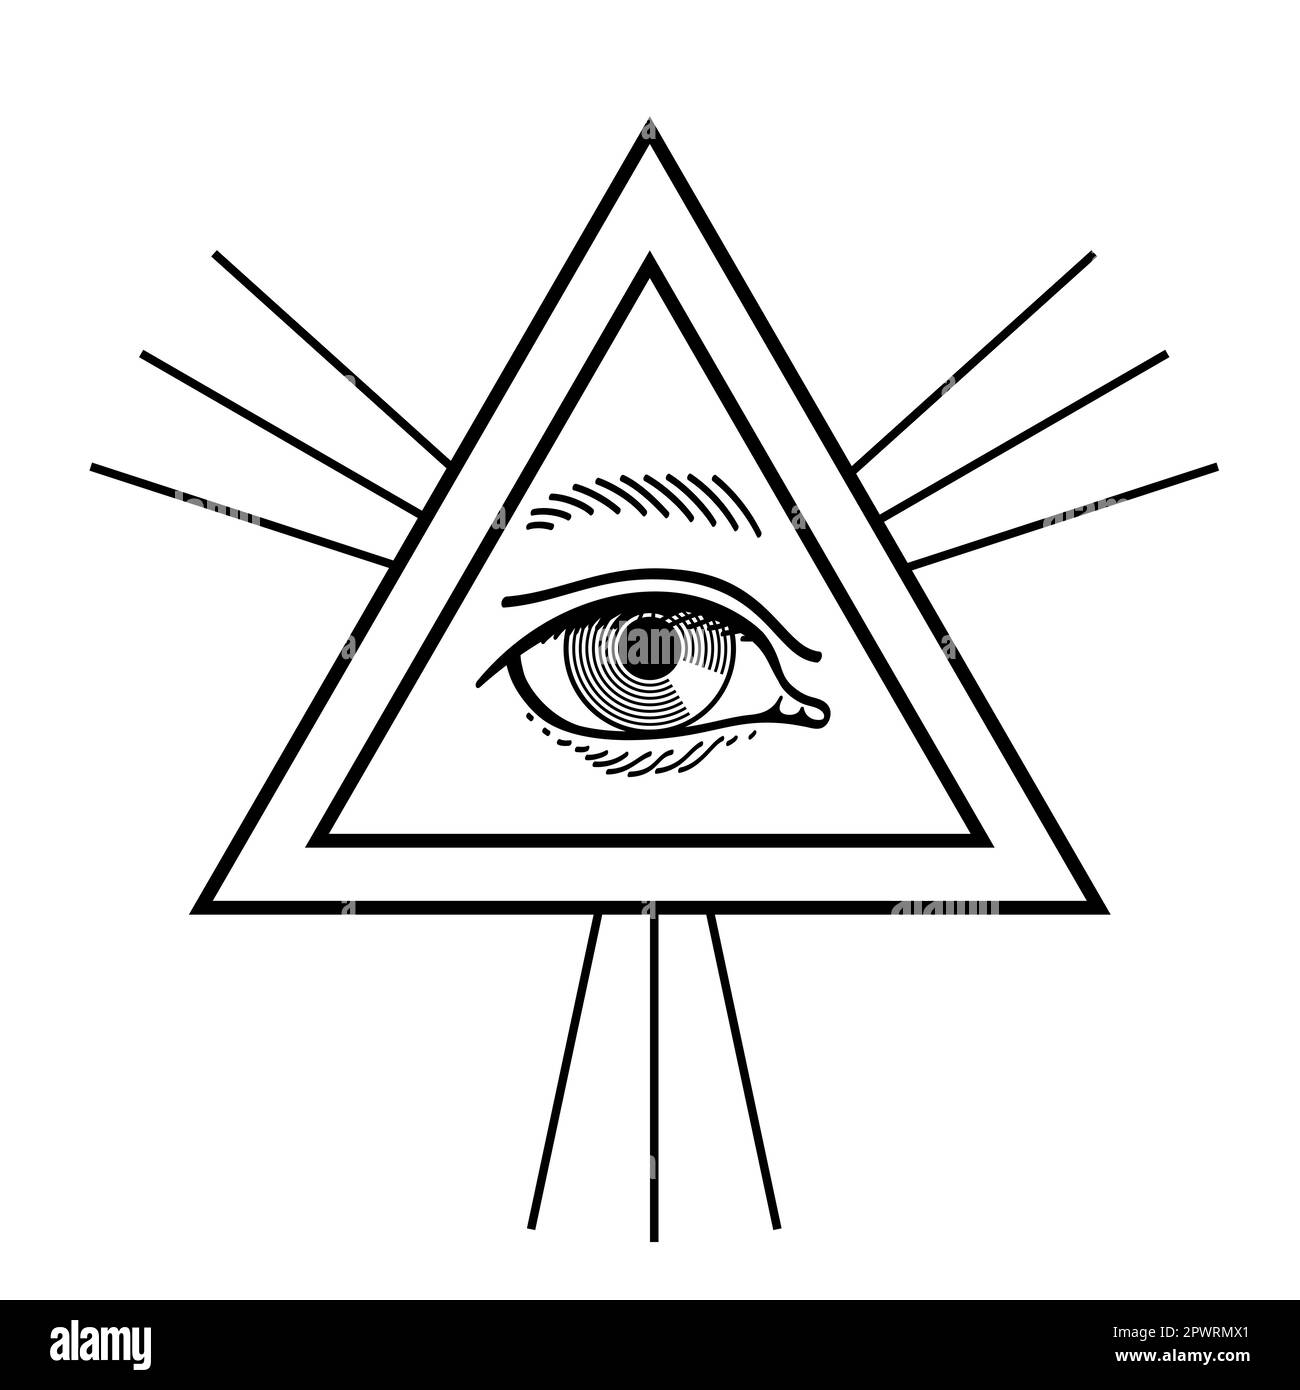 All-Seeing Eye of God, or the Eye of Providence. A triangle surrounded by rays of light or glory represents the divine providence. God is watching us. Stock Photo